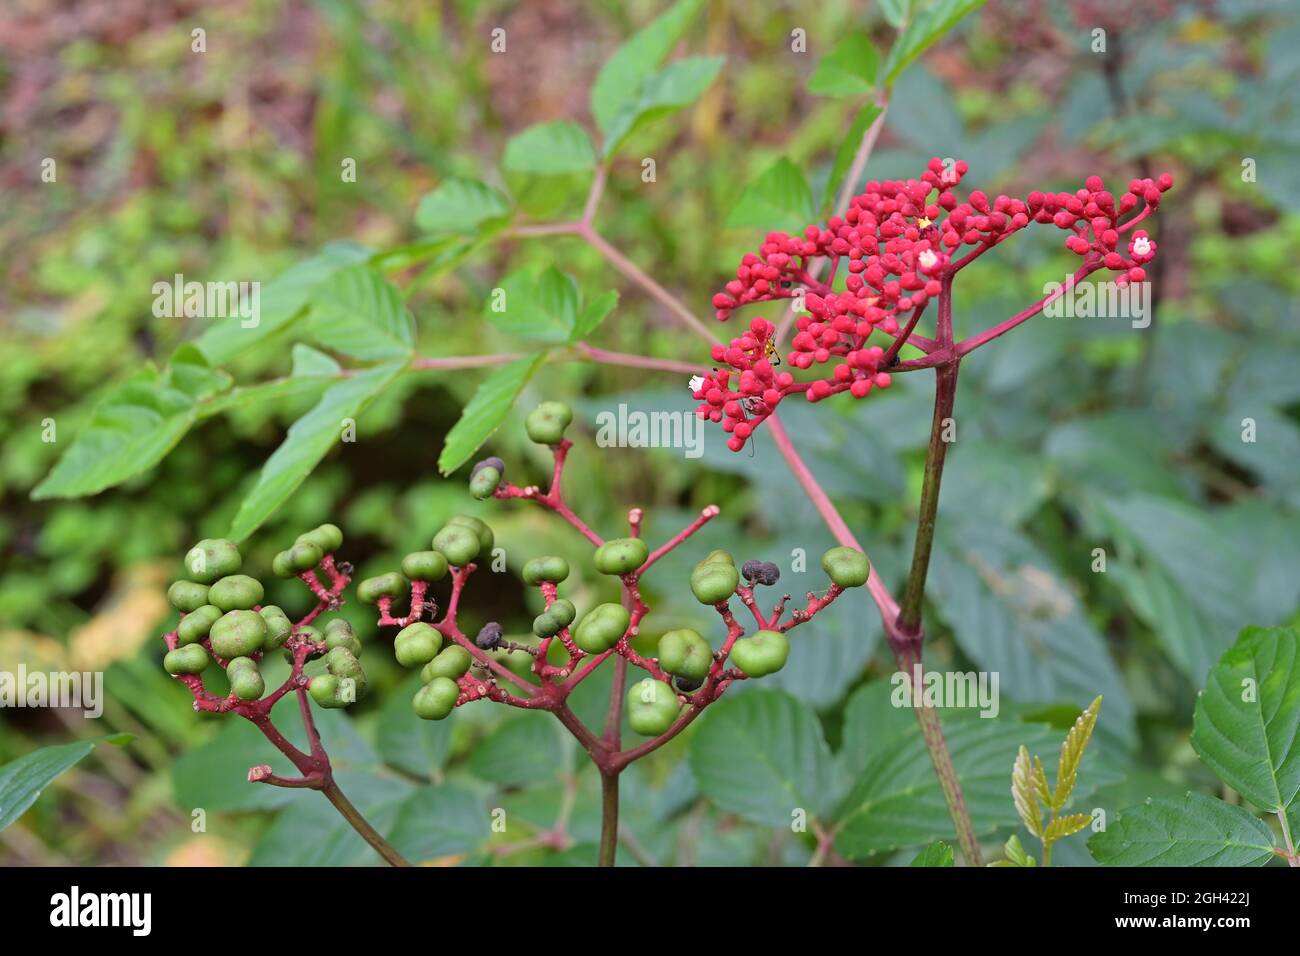 Bright red inflorescence with tiny white flowers and green berries of the Leea rubra plant Stock Photo